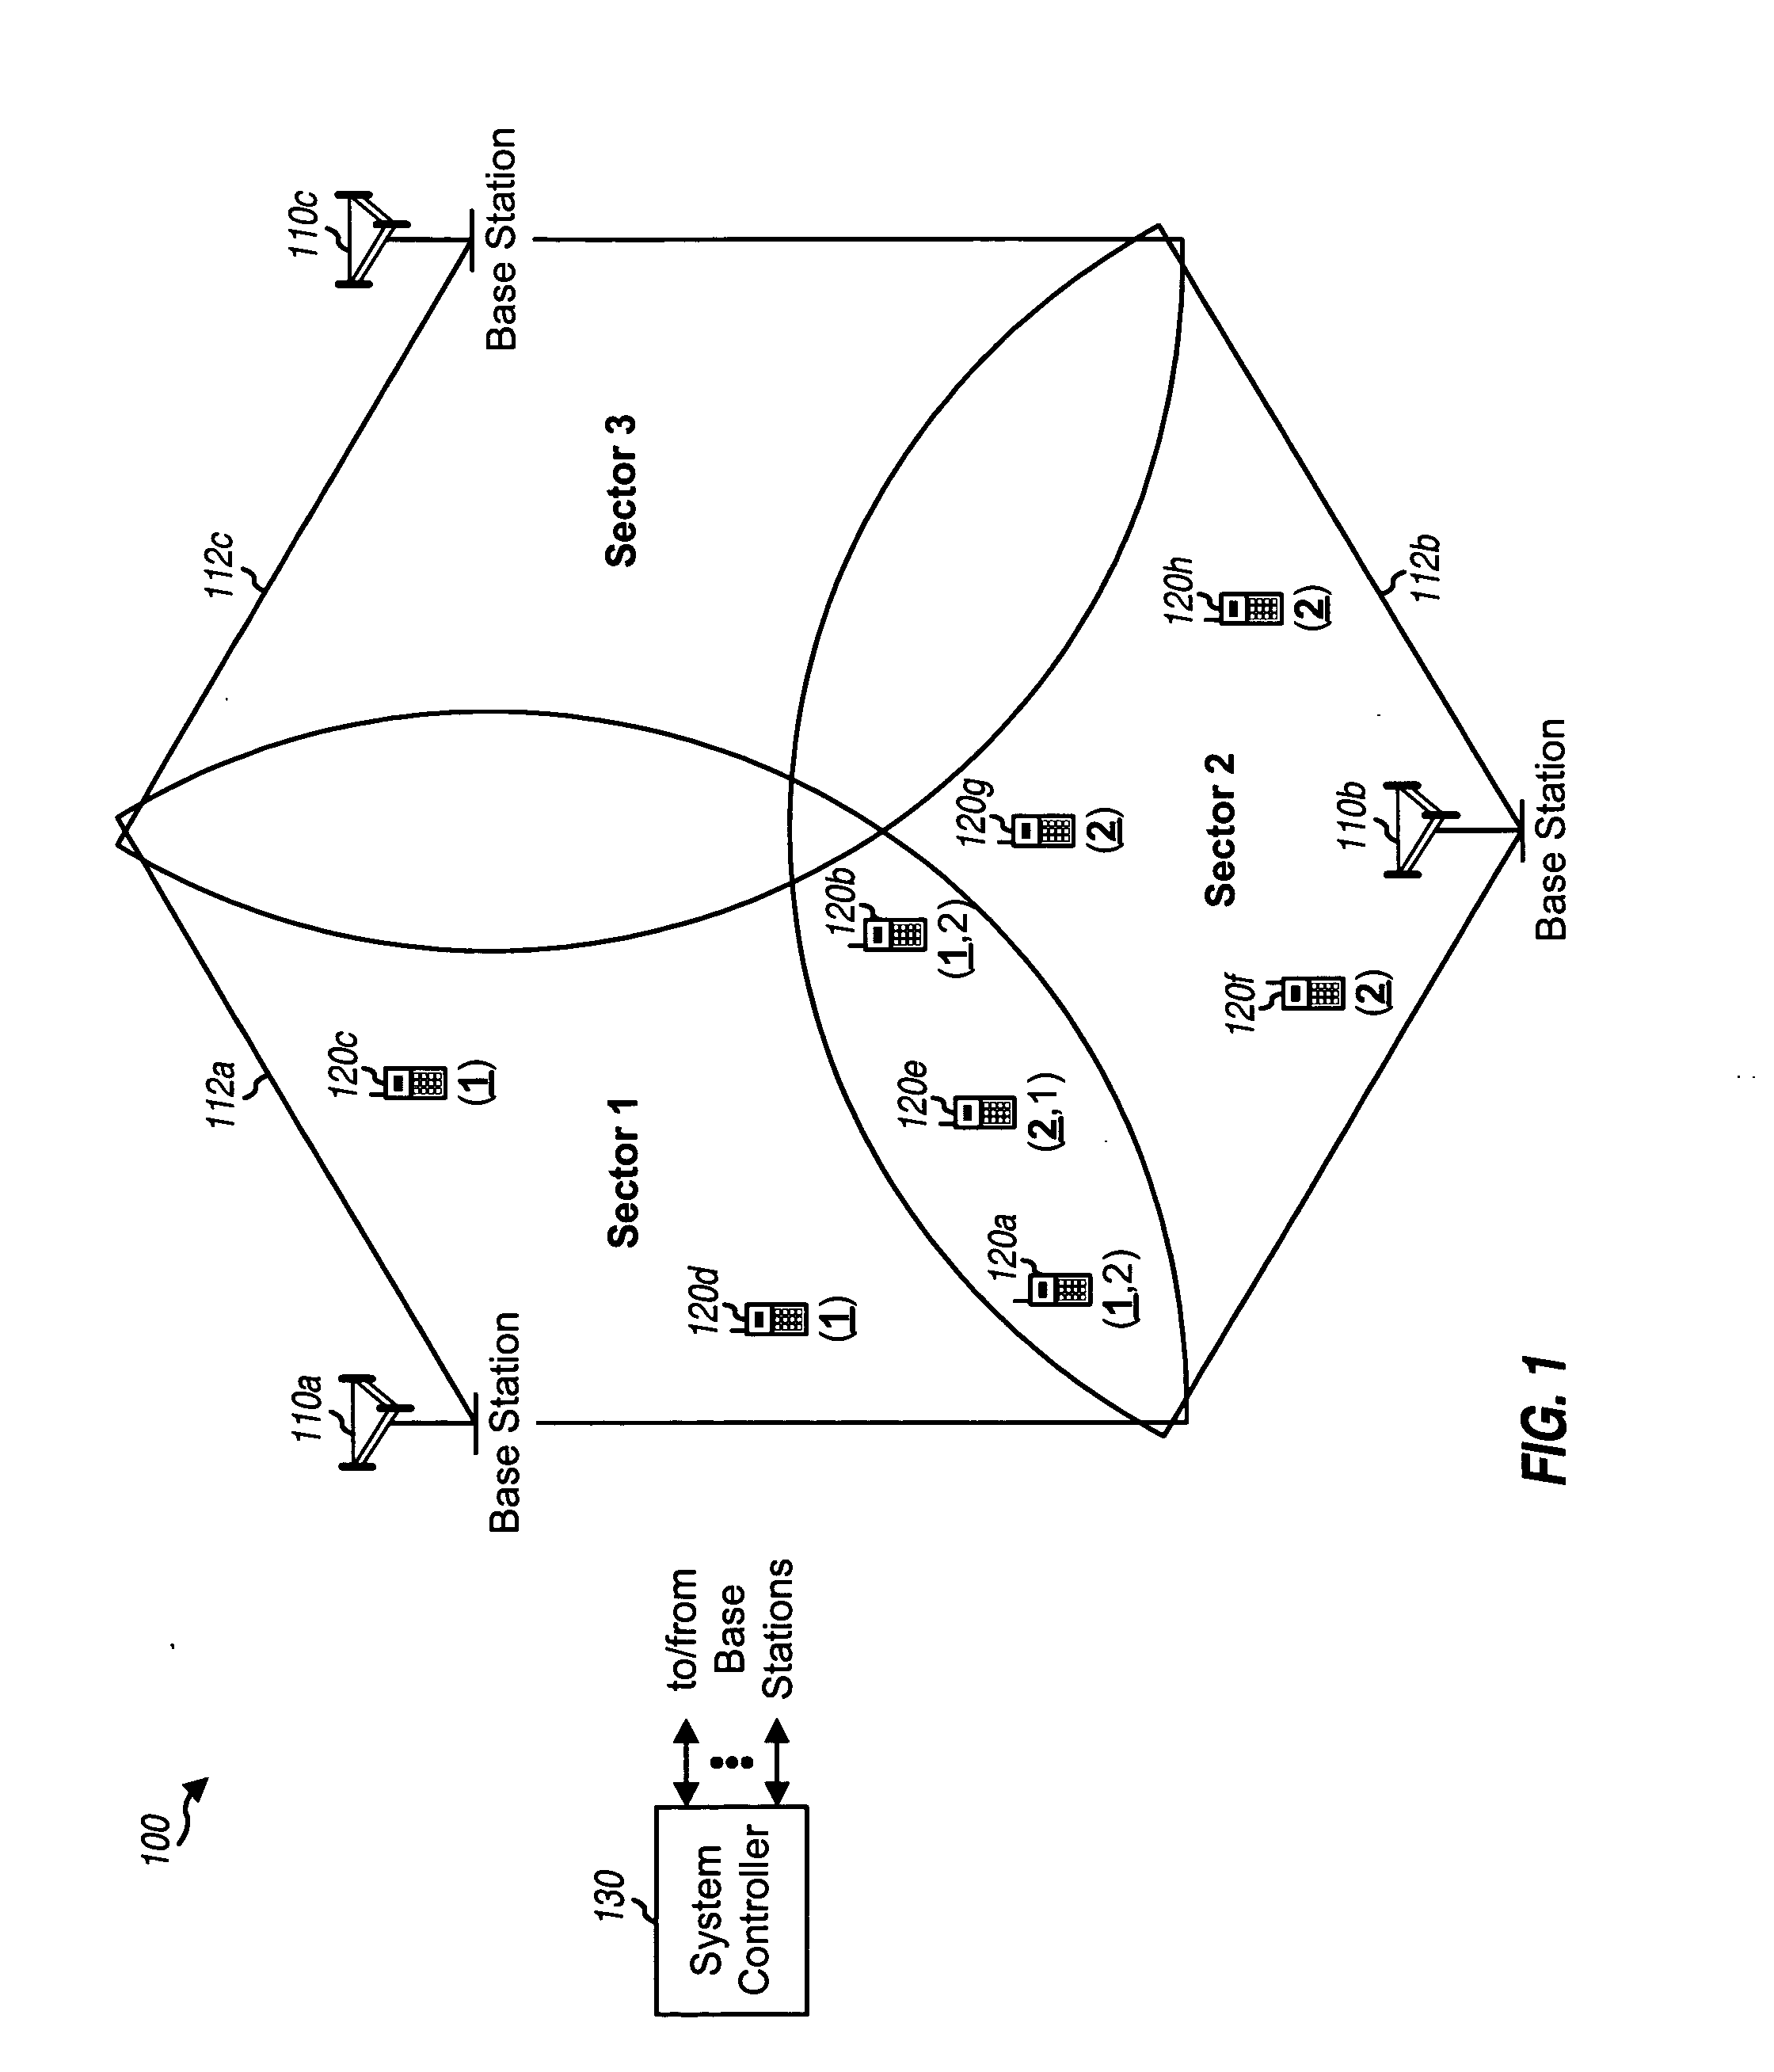 Interference estimation in a wireless communication system